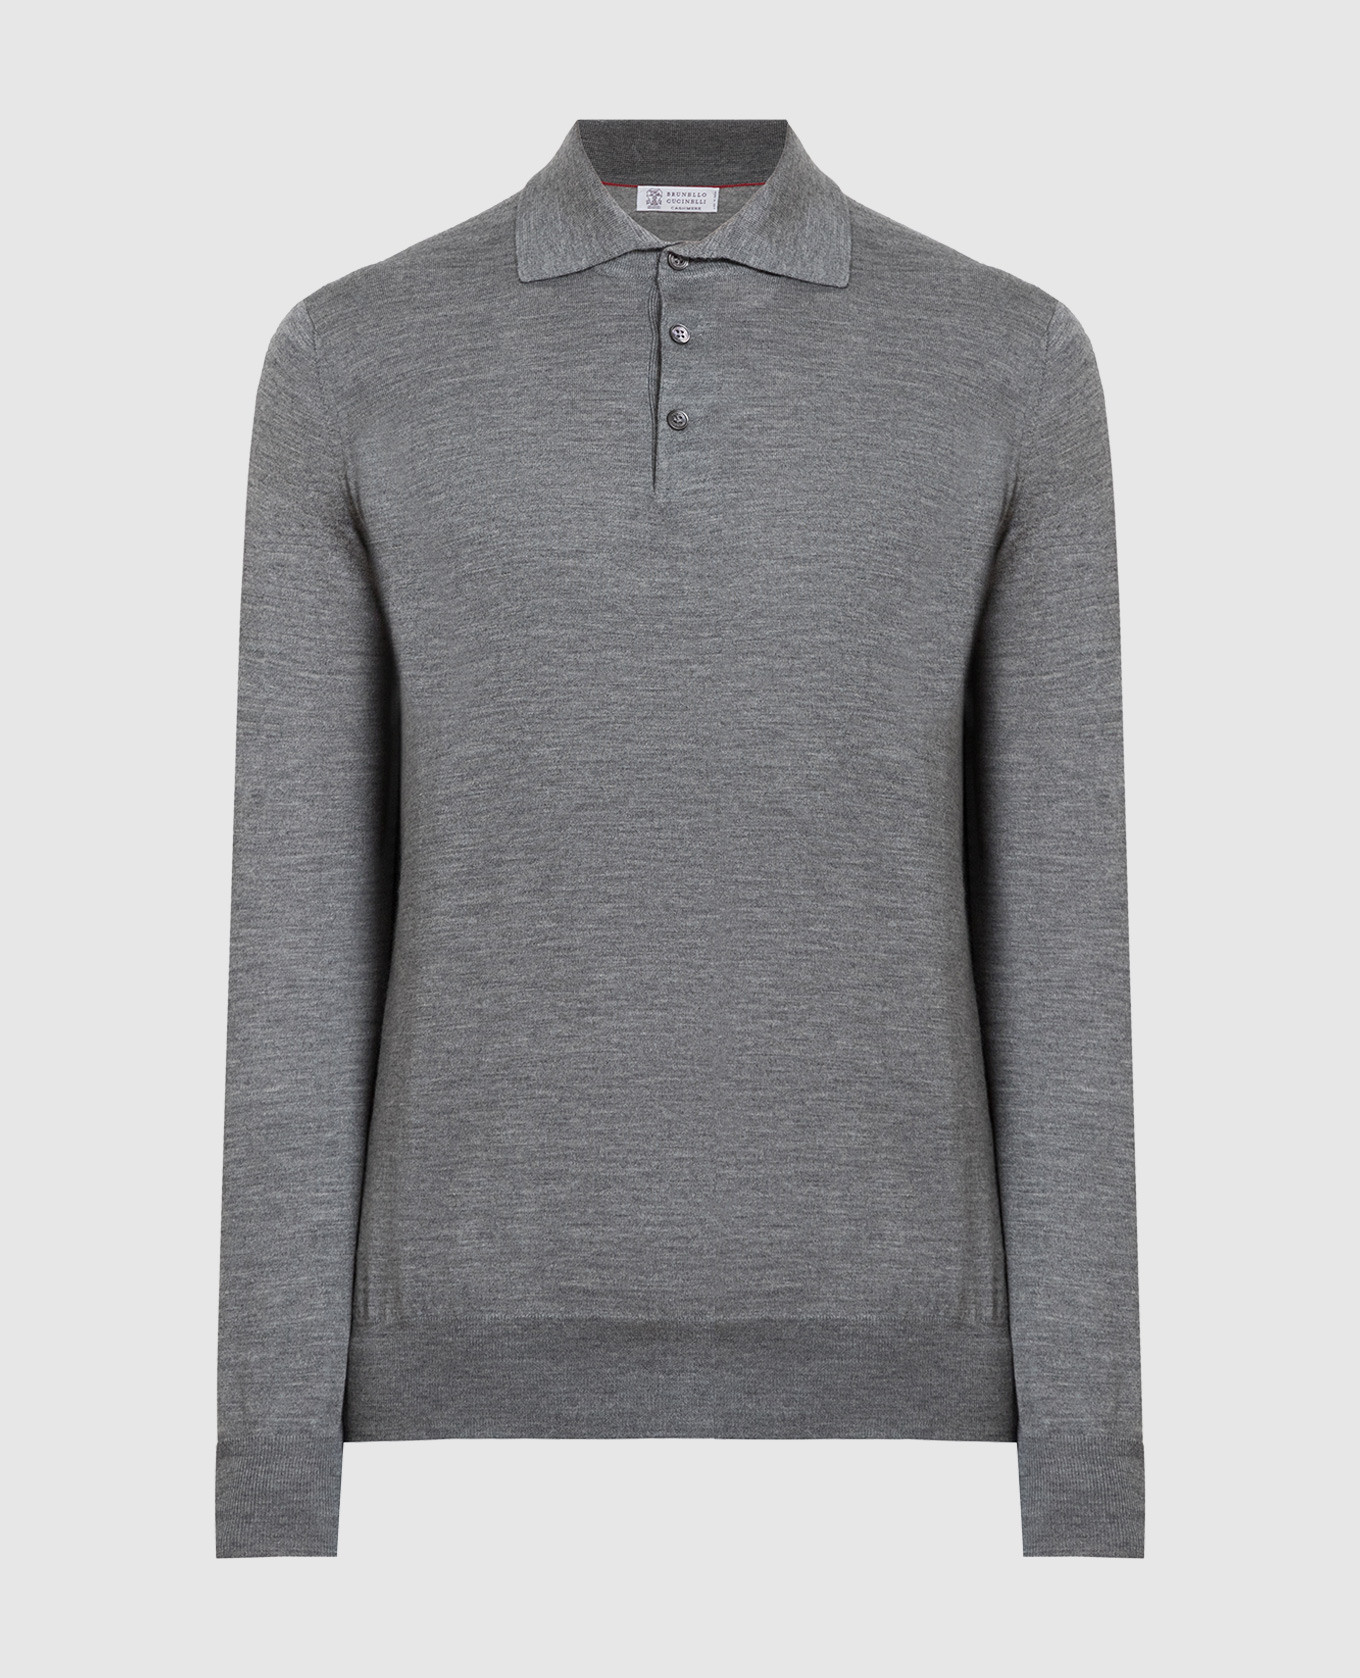 Gray wool and cashmere polo shirt